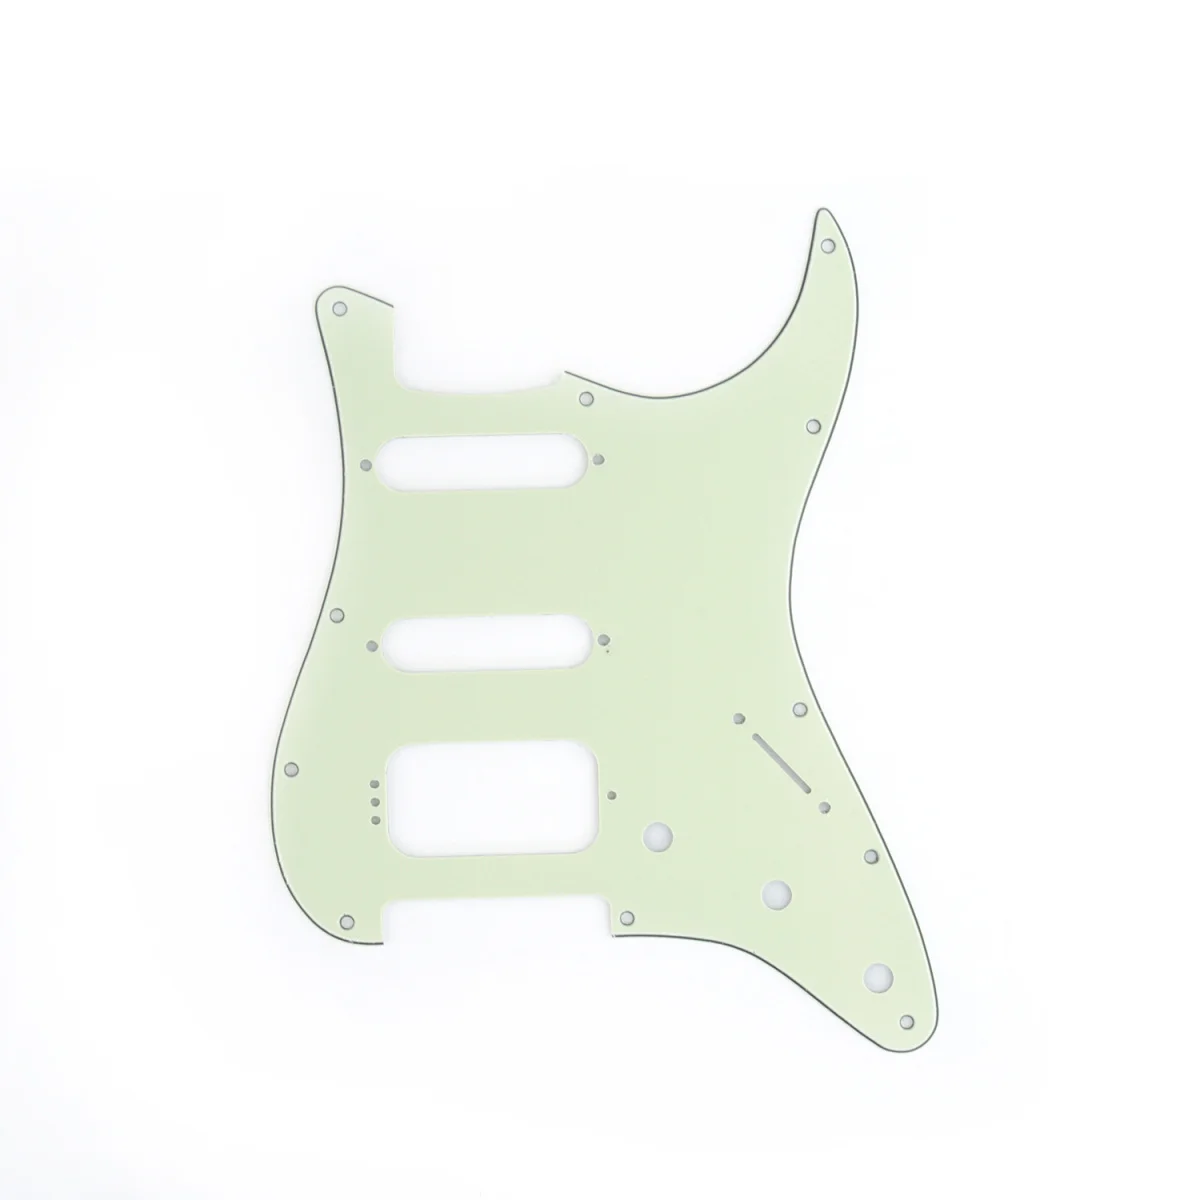 

Musiclily Pro 11-Hole Round Corner HSS Guitar Strat Pickguard for USA/Mexican Strat 4-screw Humbucking Pickup, 3Ply Aged Green